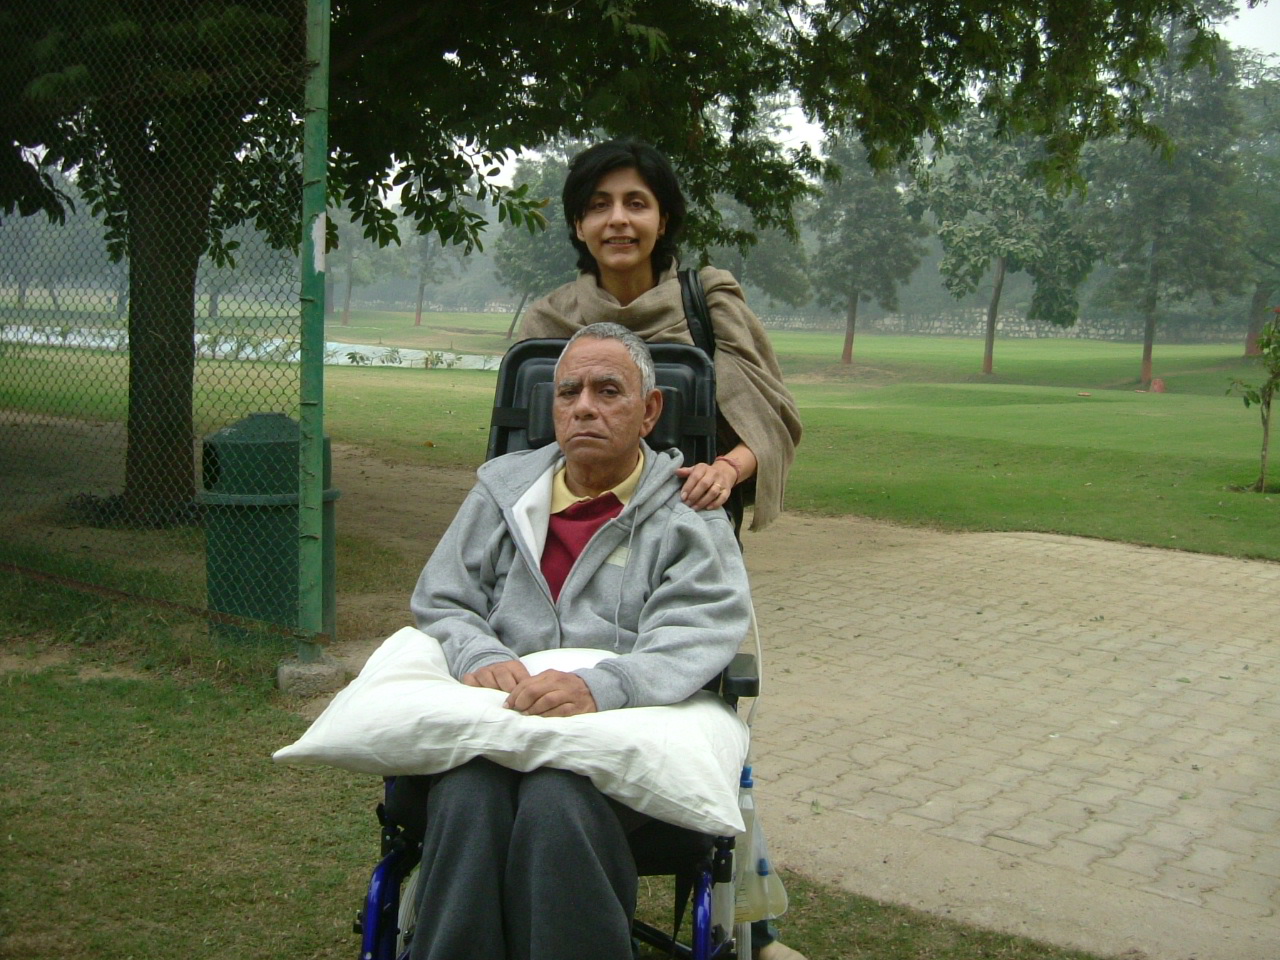 Rima with her father